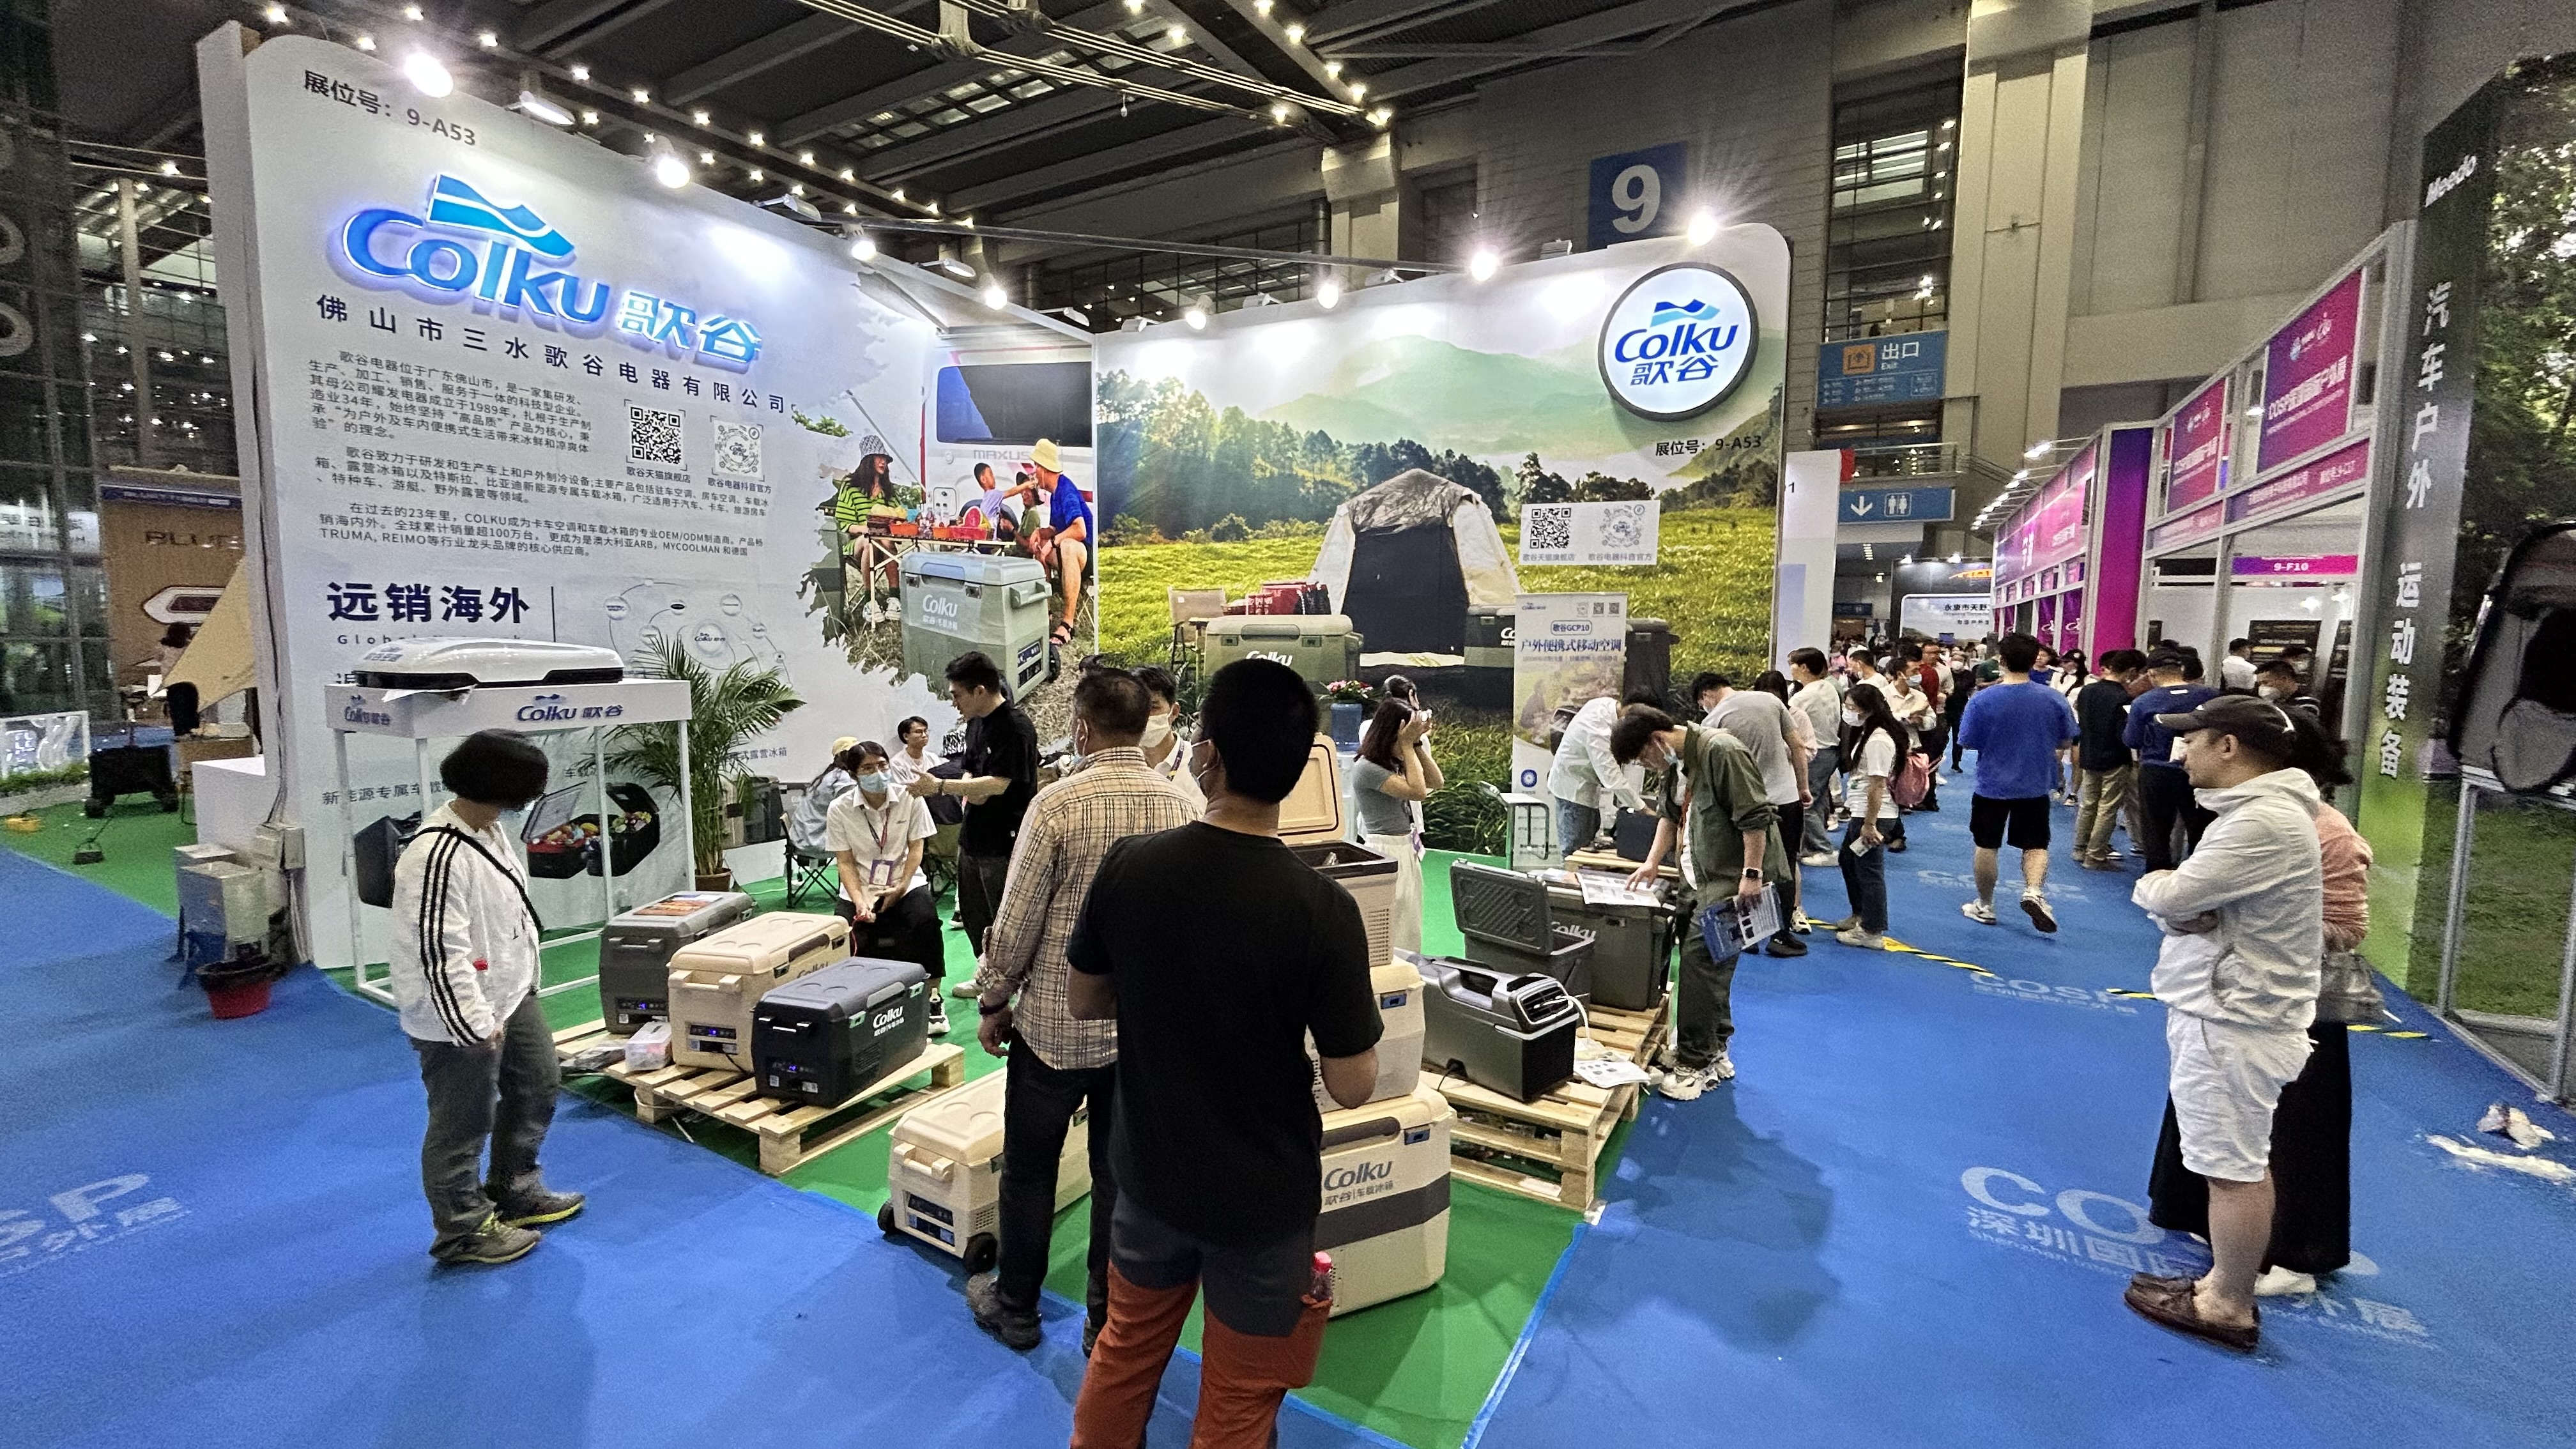 Shenzhen Futian COSP Exhibition grandly launched Colku’s revolutionary outdoor products